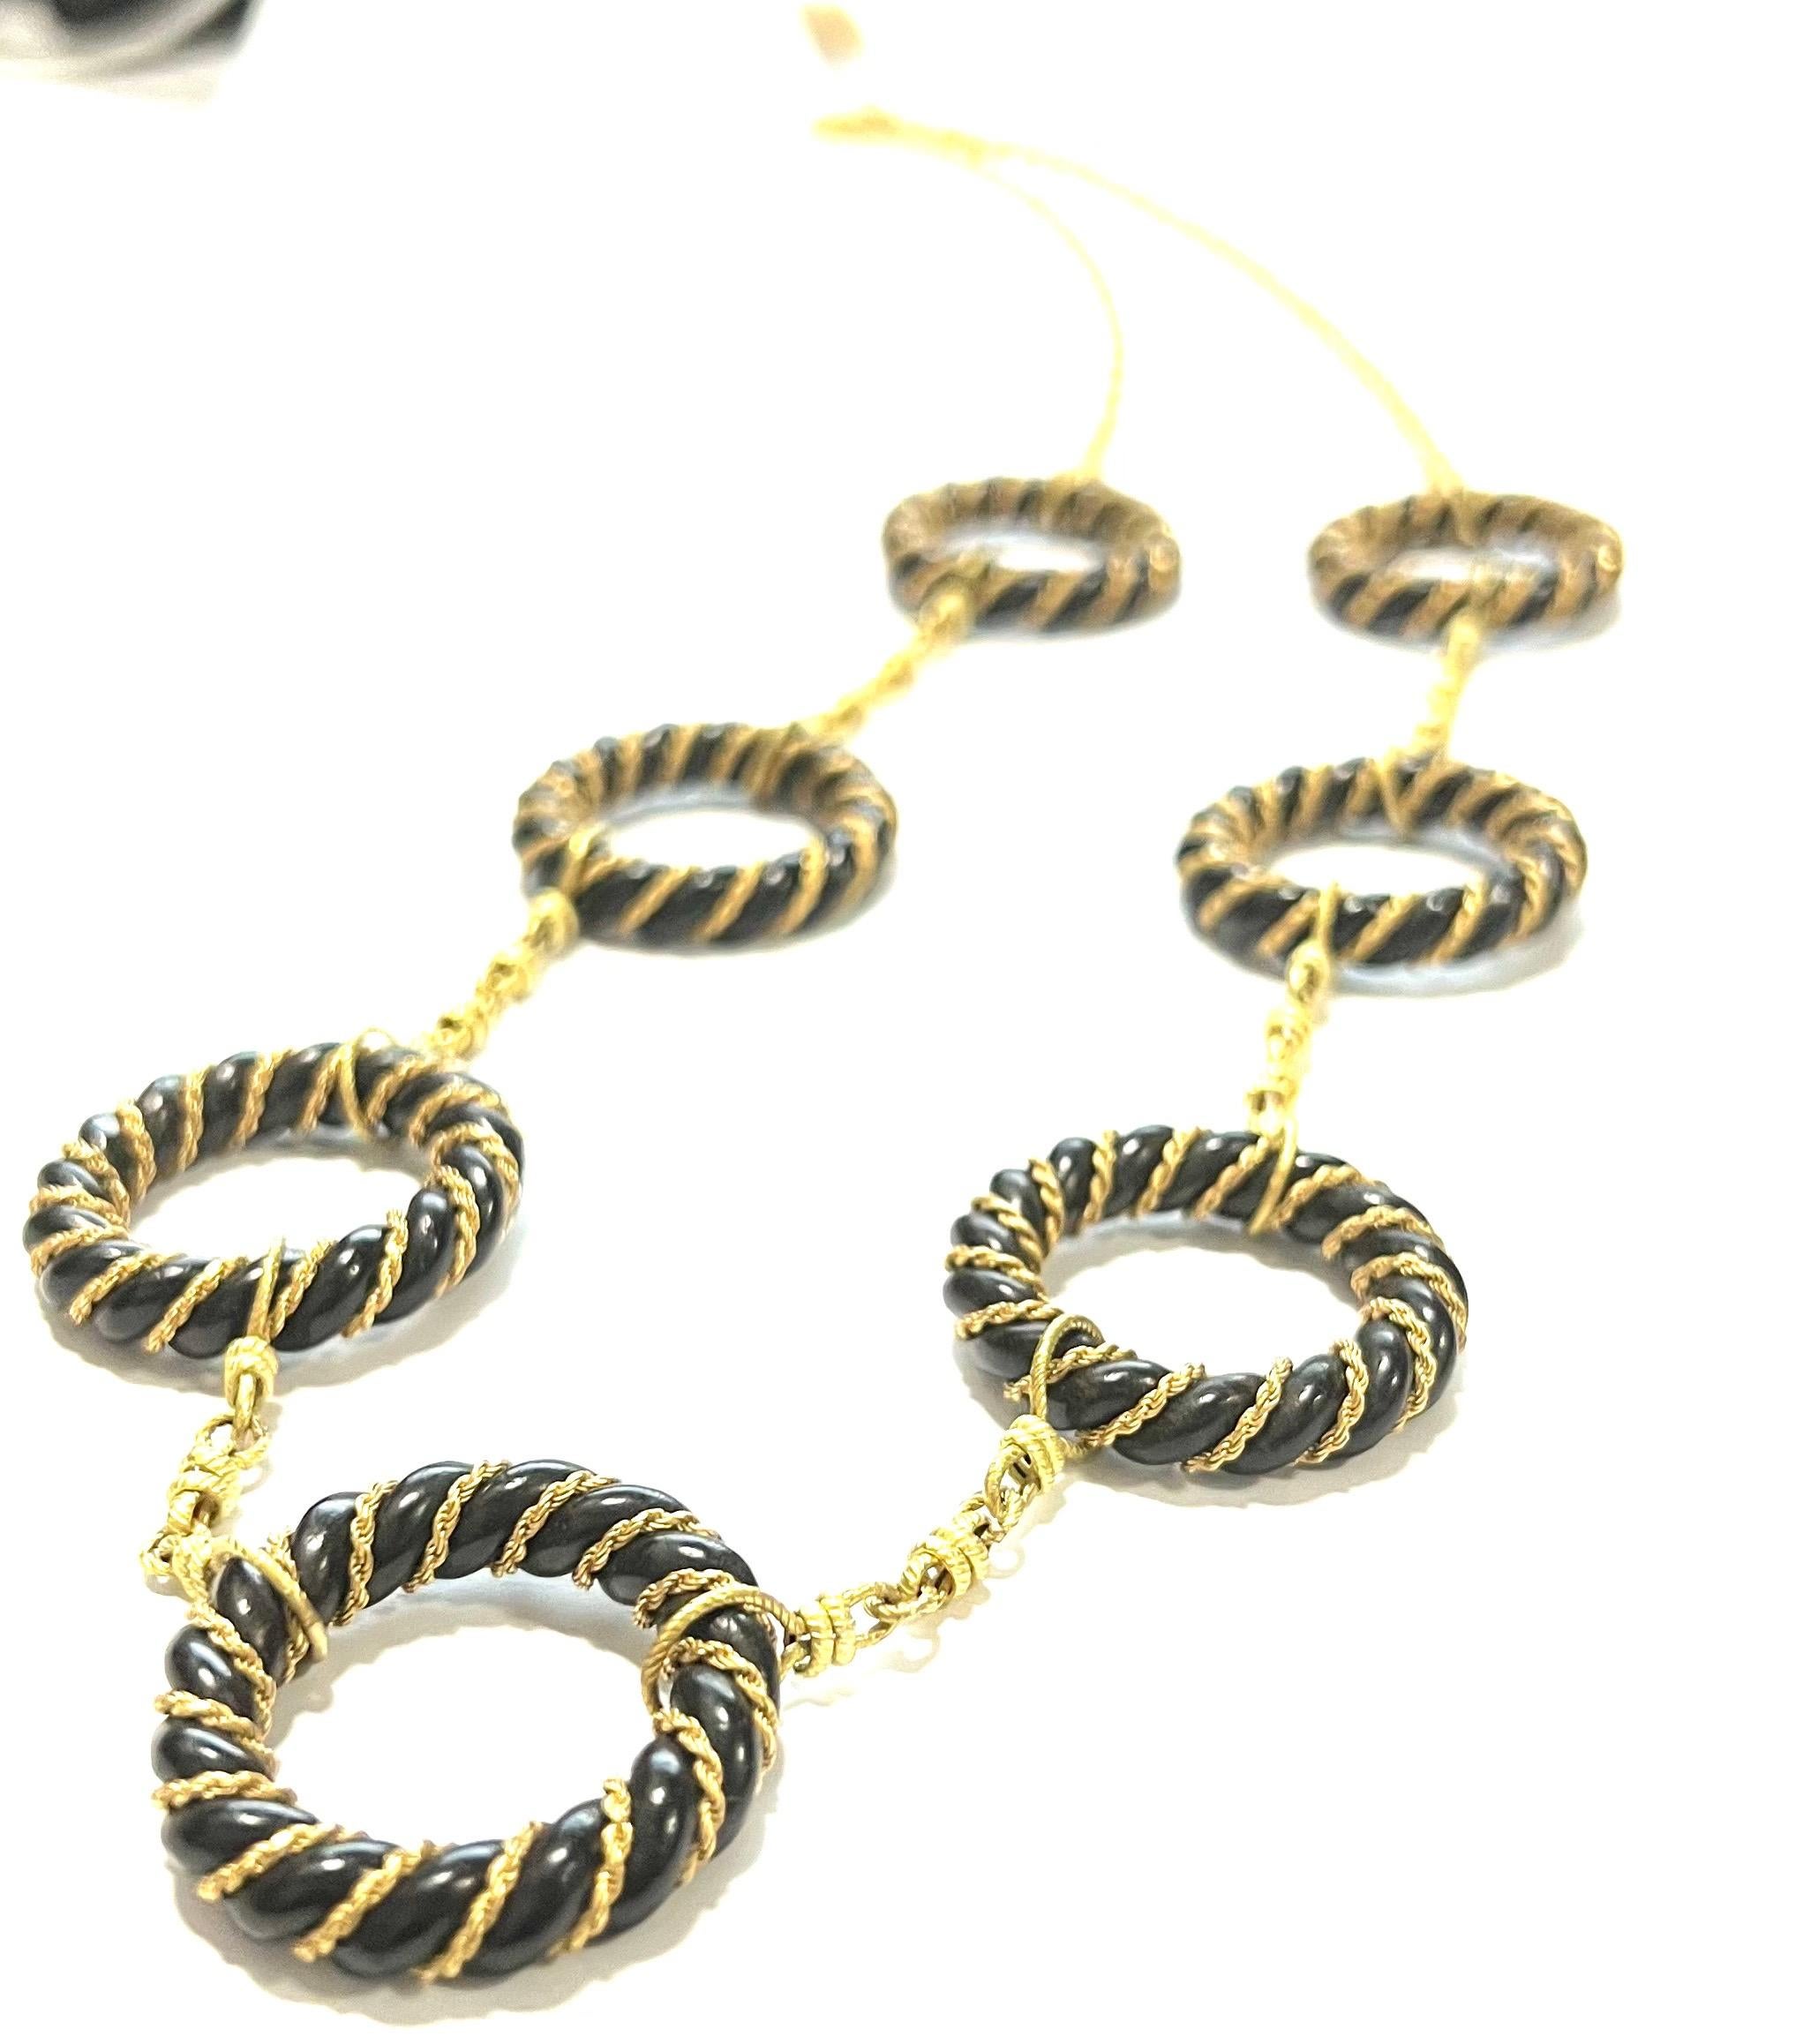 Necklace in 18k Yellow Matt Gold Chain With Ebony Links 
Total weight gr.49.4
Gold weight gr.35
Length cm 78
